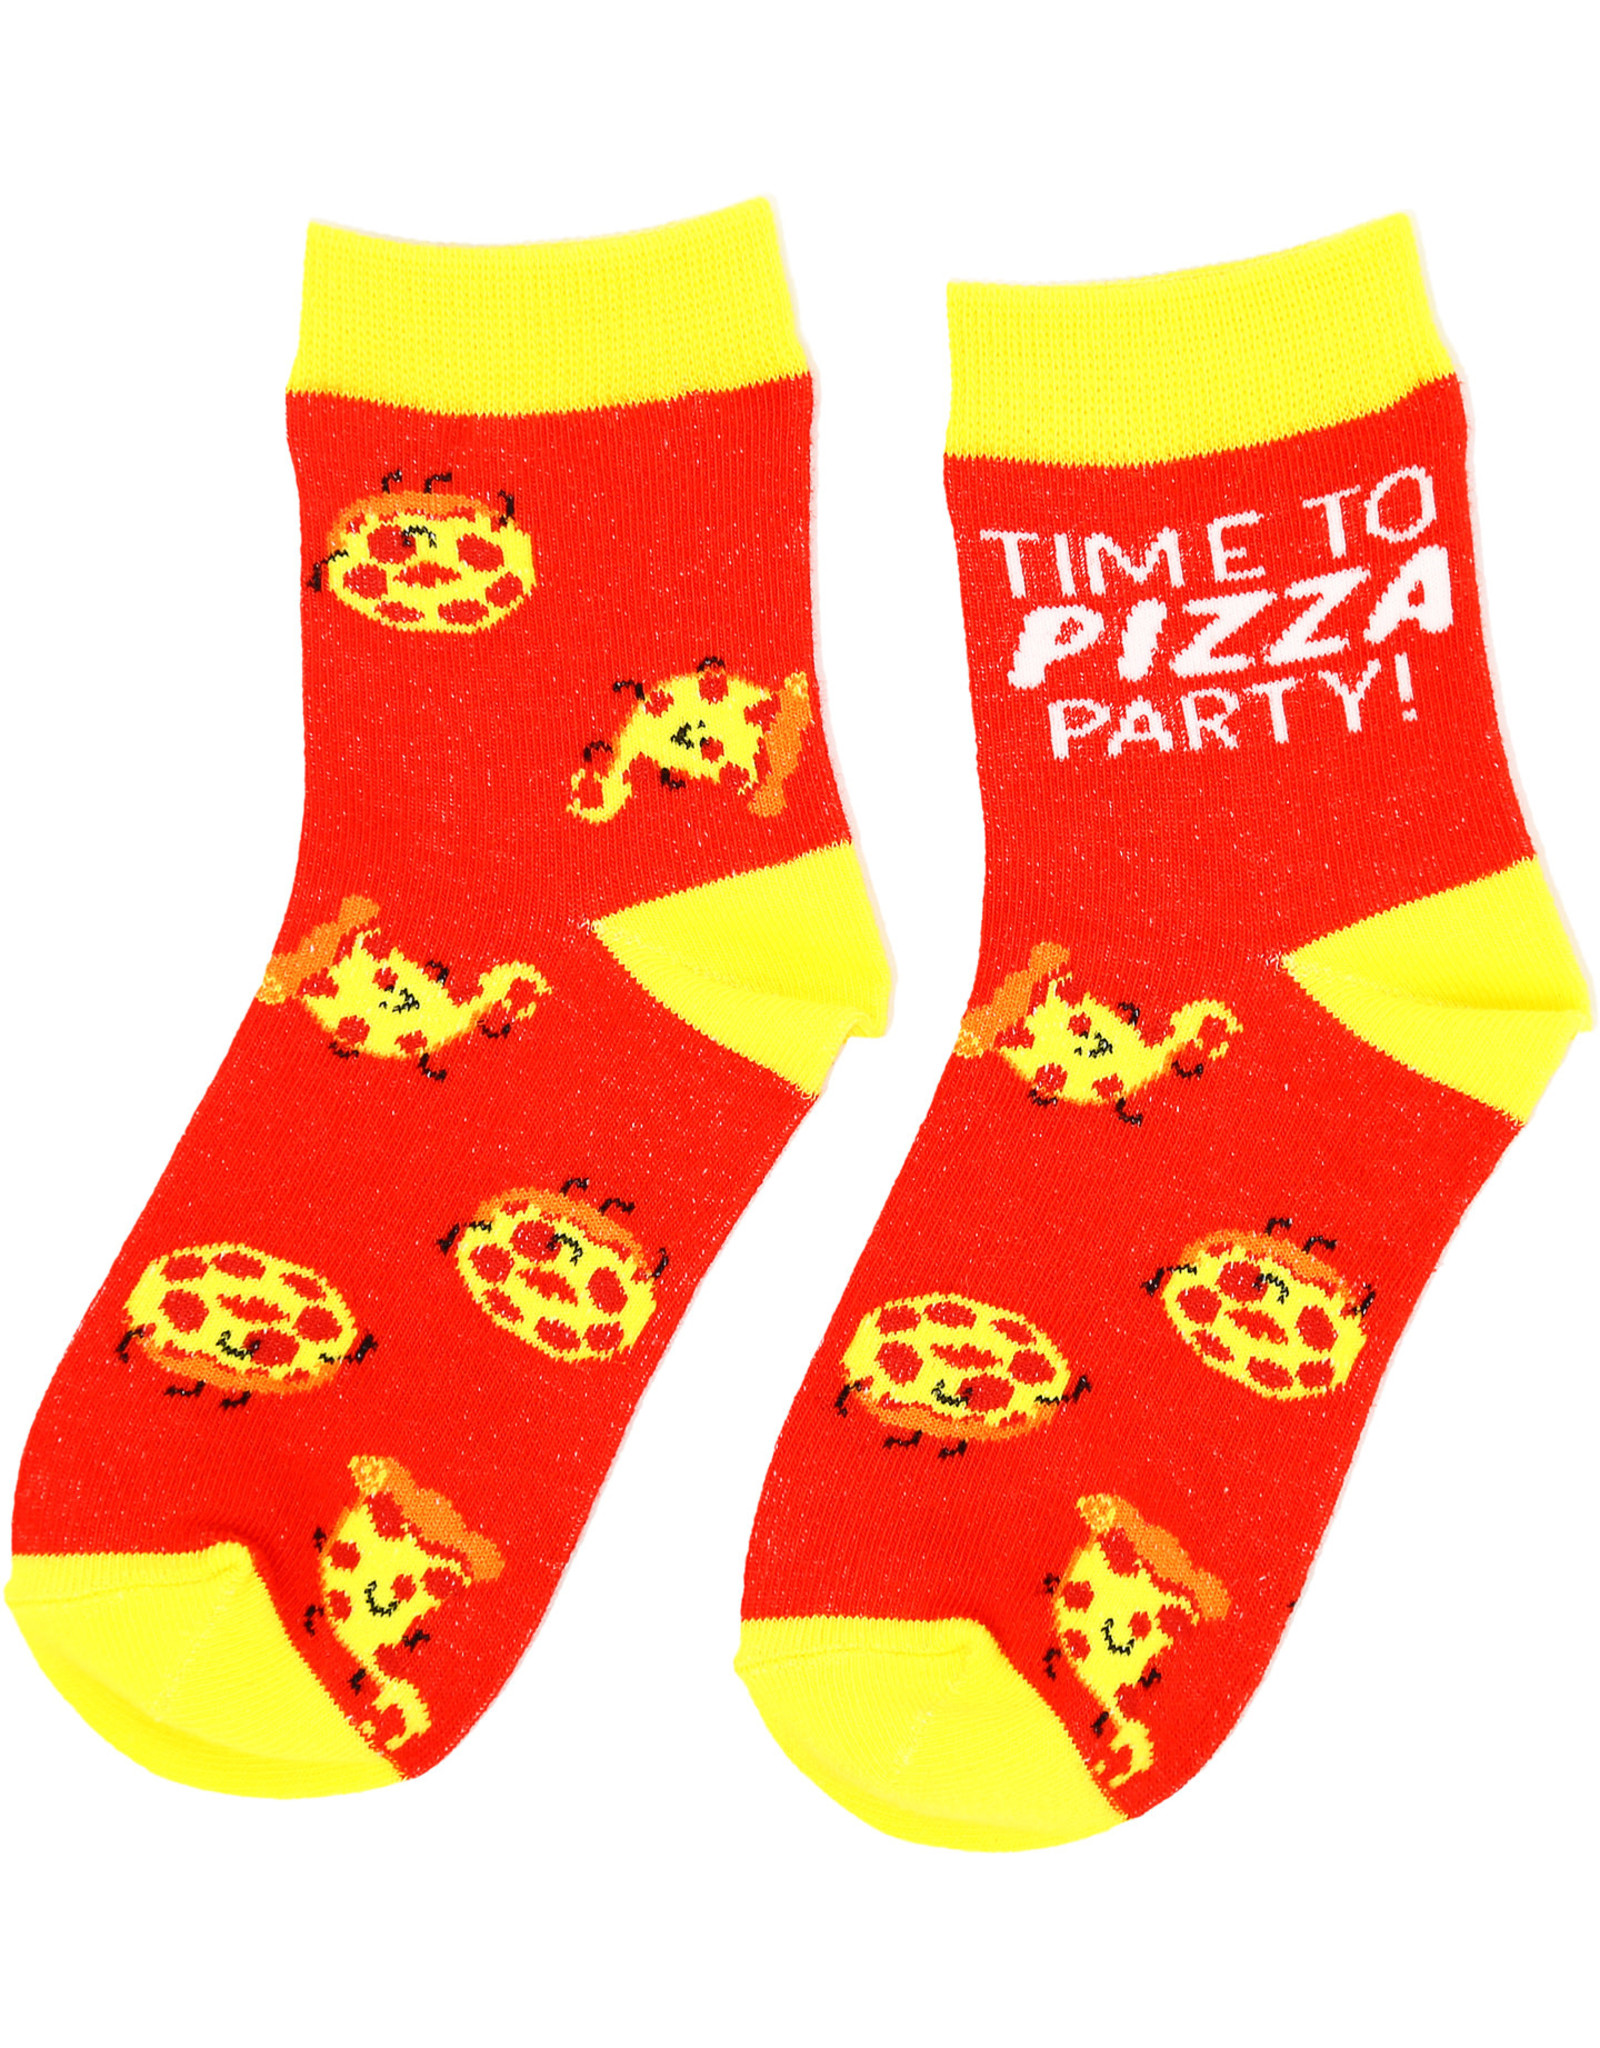 PGC "Time to Pizza Party!" Youth Socks